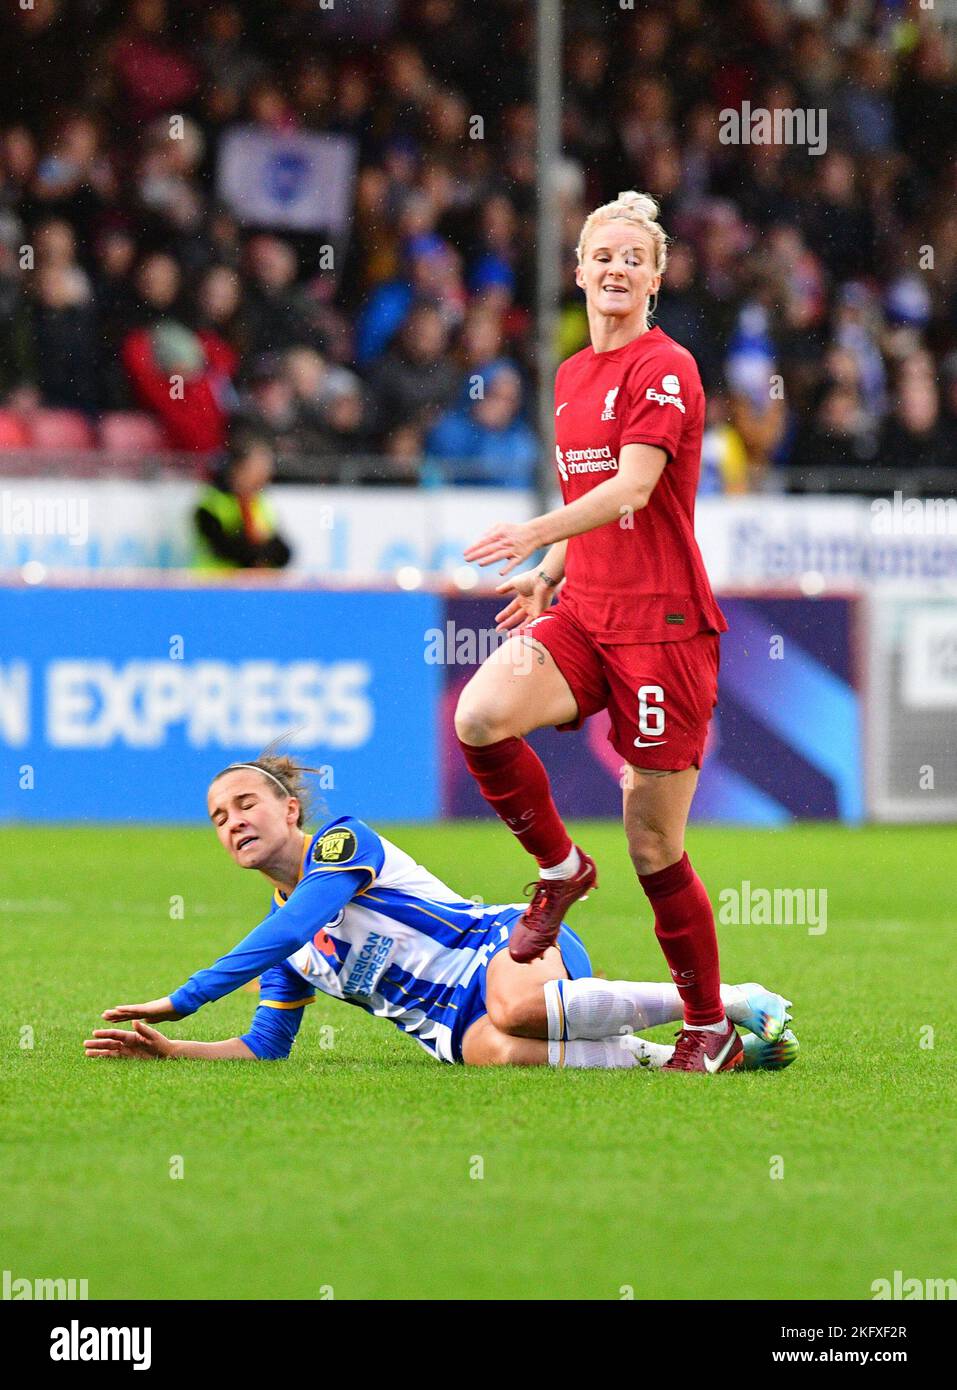 Crawley, UK. 20th Nov, 2022. Jasmine Matthews of Liverpool fouls Julia Zigiotti Olme of Brighton and Hove Albion during the FA Women's Super League match between Brighton & Hove Albion Women and Liverpool Women at The People's Pension Stadium on November 20th 2022 in Crawley, United Kingdom. (Photo by Jeff Mood/phcimages.com) Credit: PHC Images/Alamy Live News Stock Photo